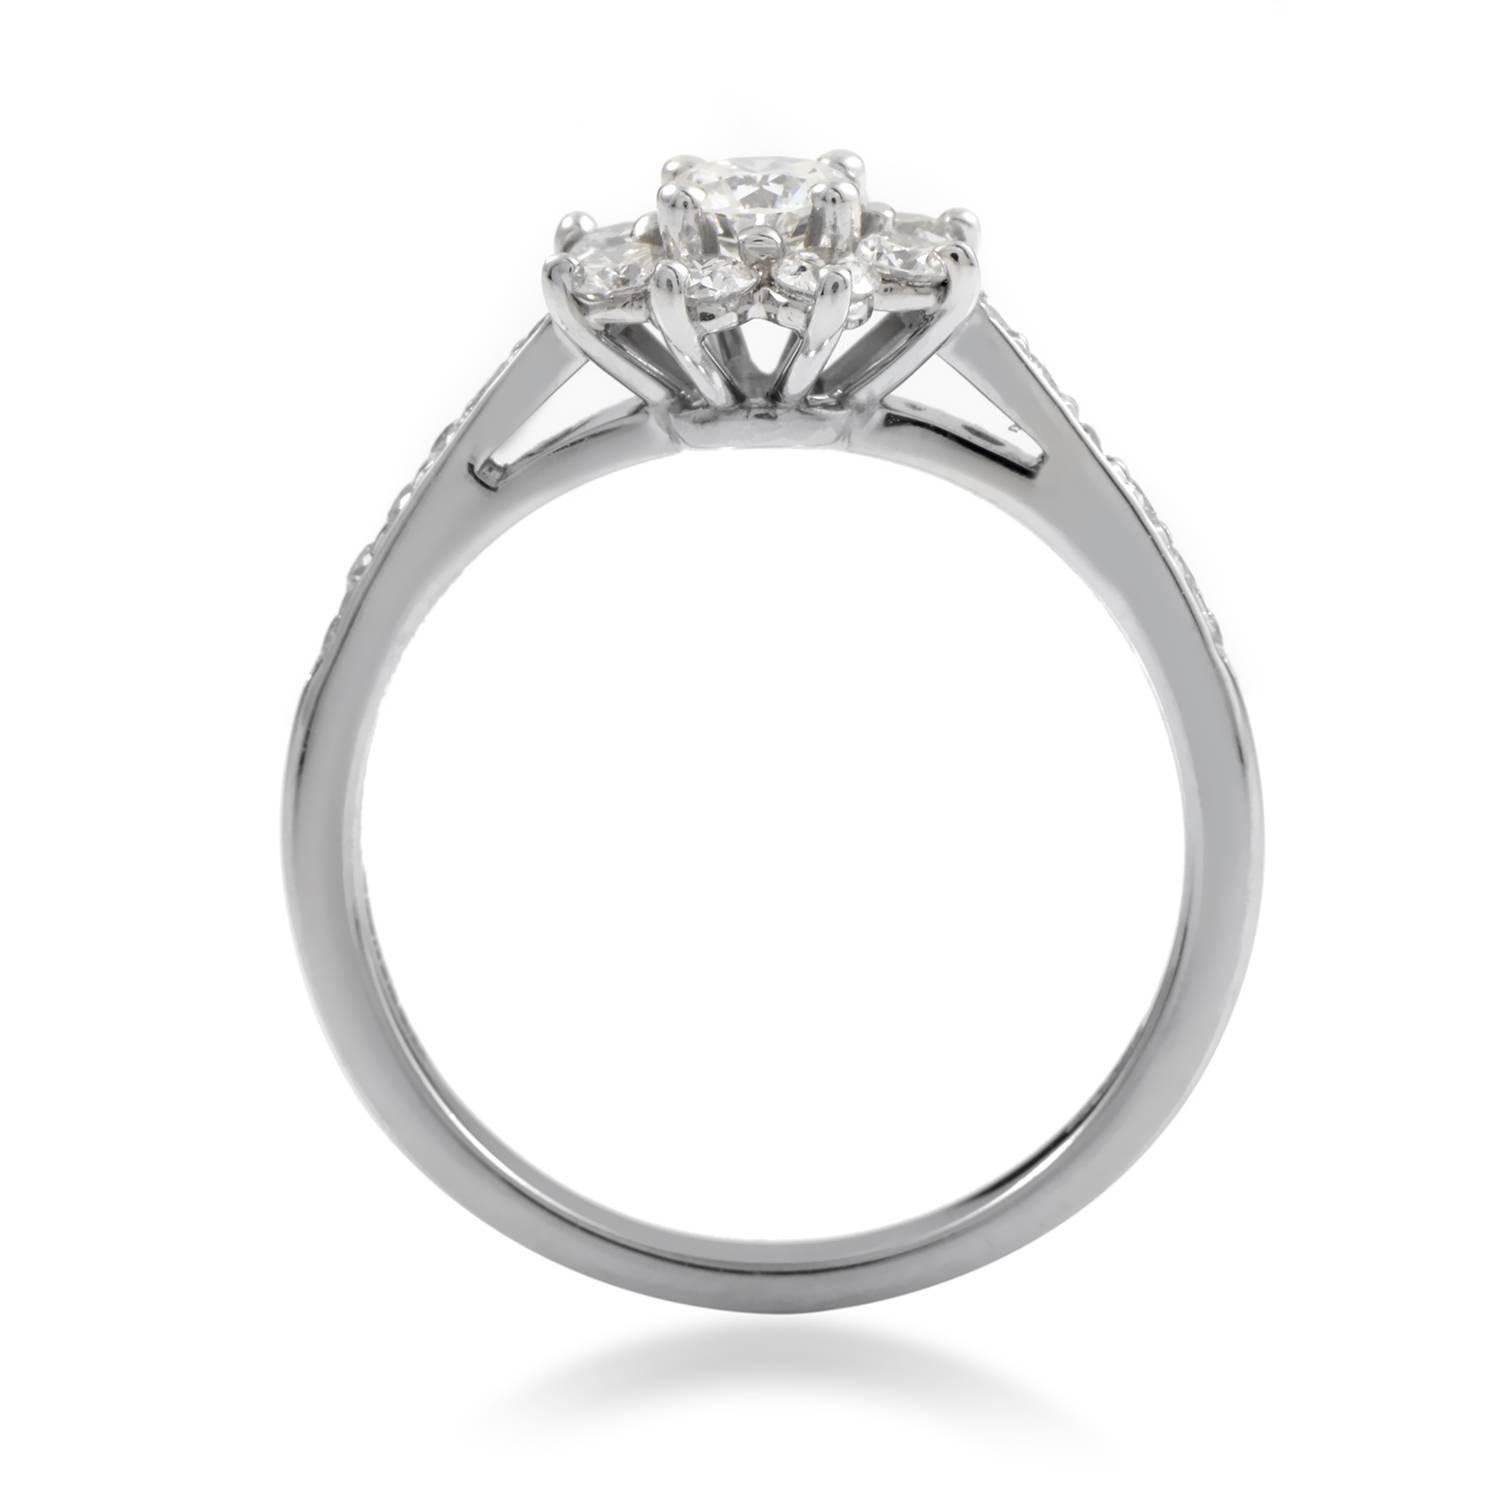 Nothing says class like a ring from Tiffany & Co. This platinum ring from the esteemed brand is made of platinum and features a gorgeous flower comprised of .80ct of F color, VVS1 clarity diamonds.
Ring Size: 5.75 (50 7/8)
Ring Top Dimensions: 8 x